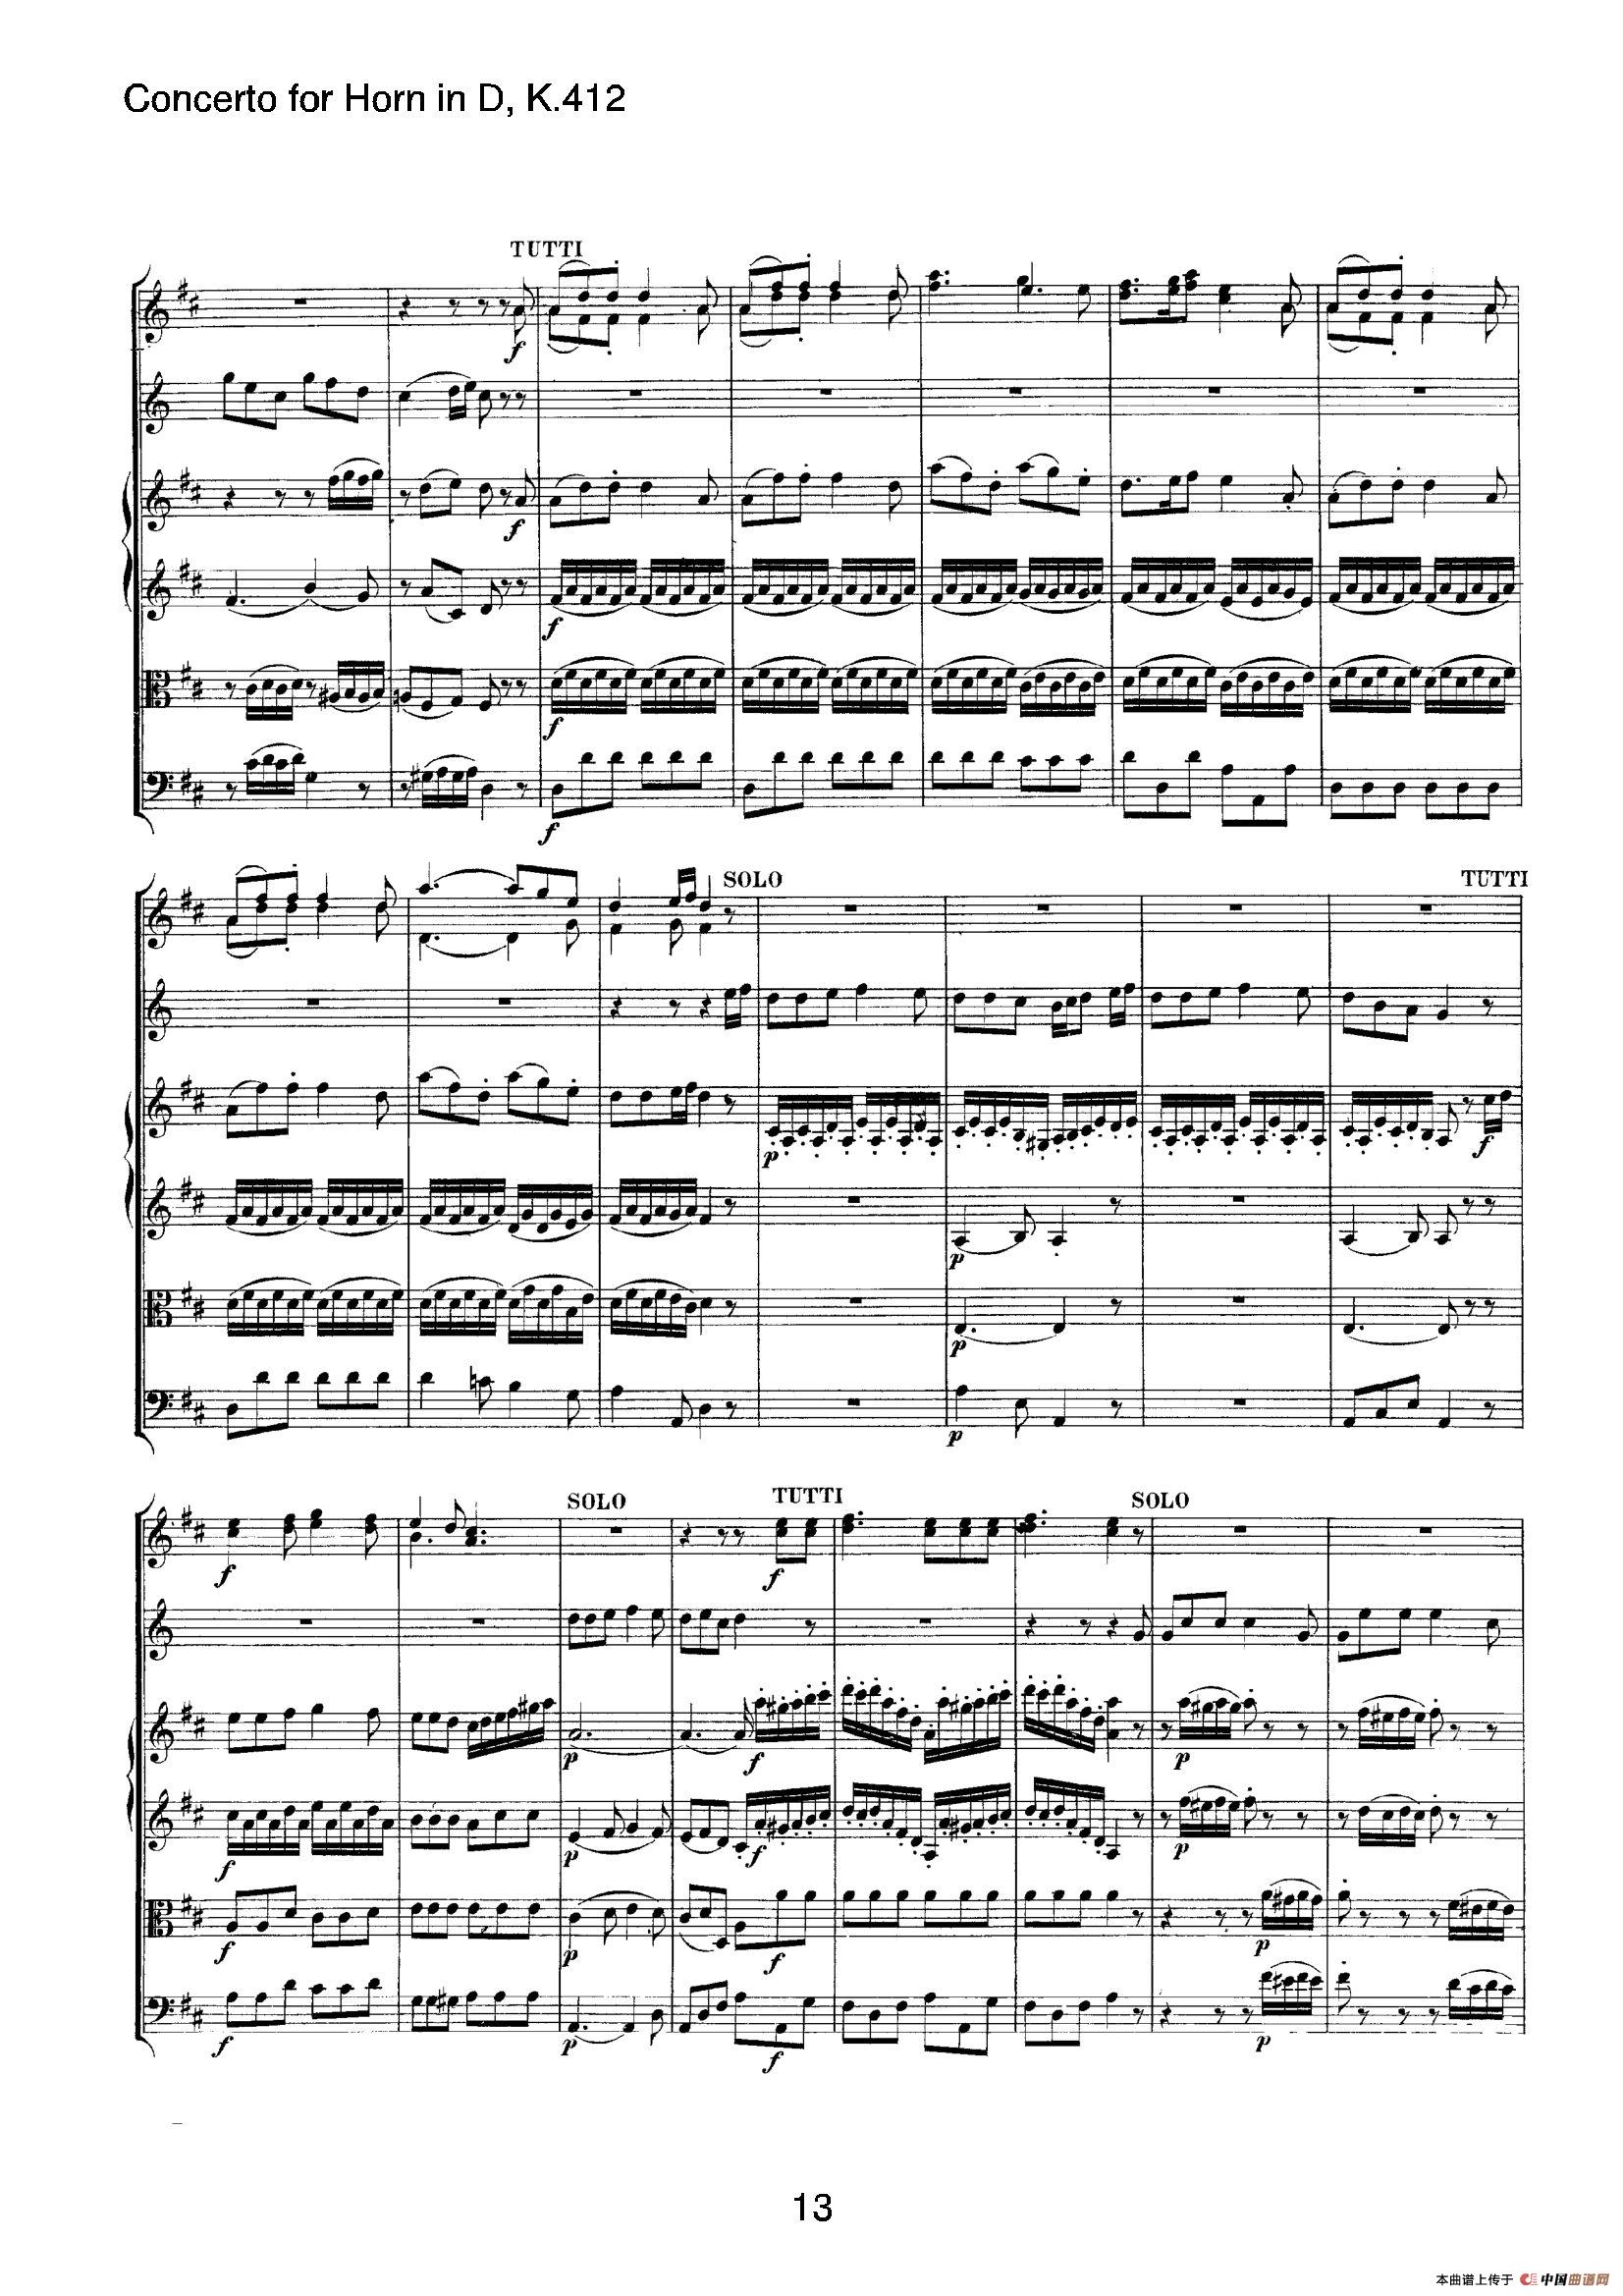 Concerto for Horn in D，K.412（D大调第一圆号协奏曲